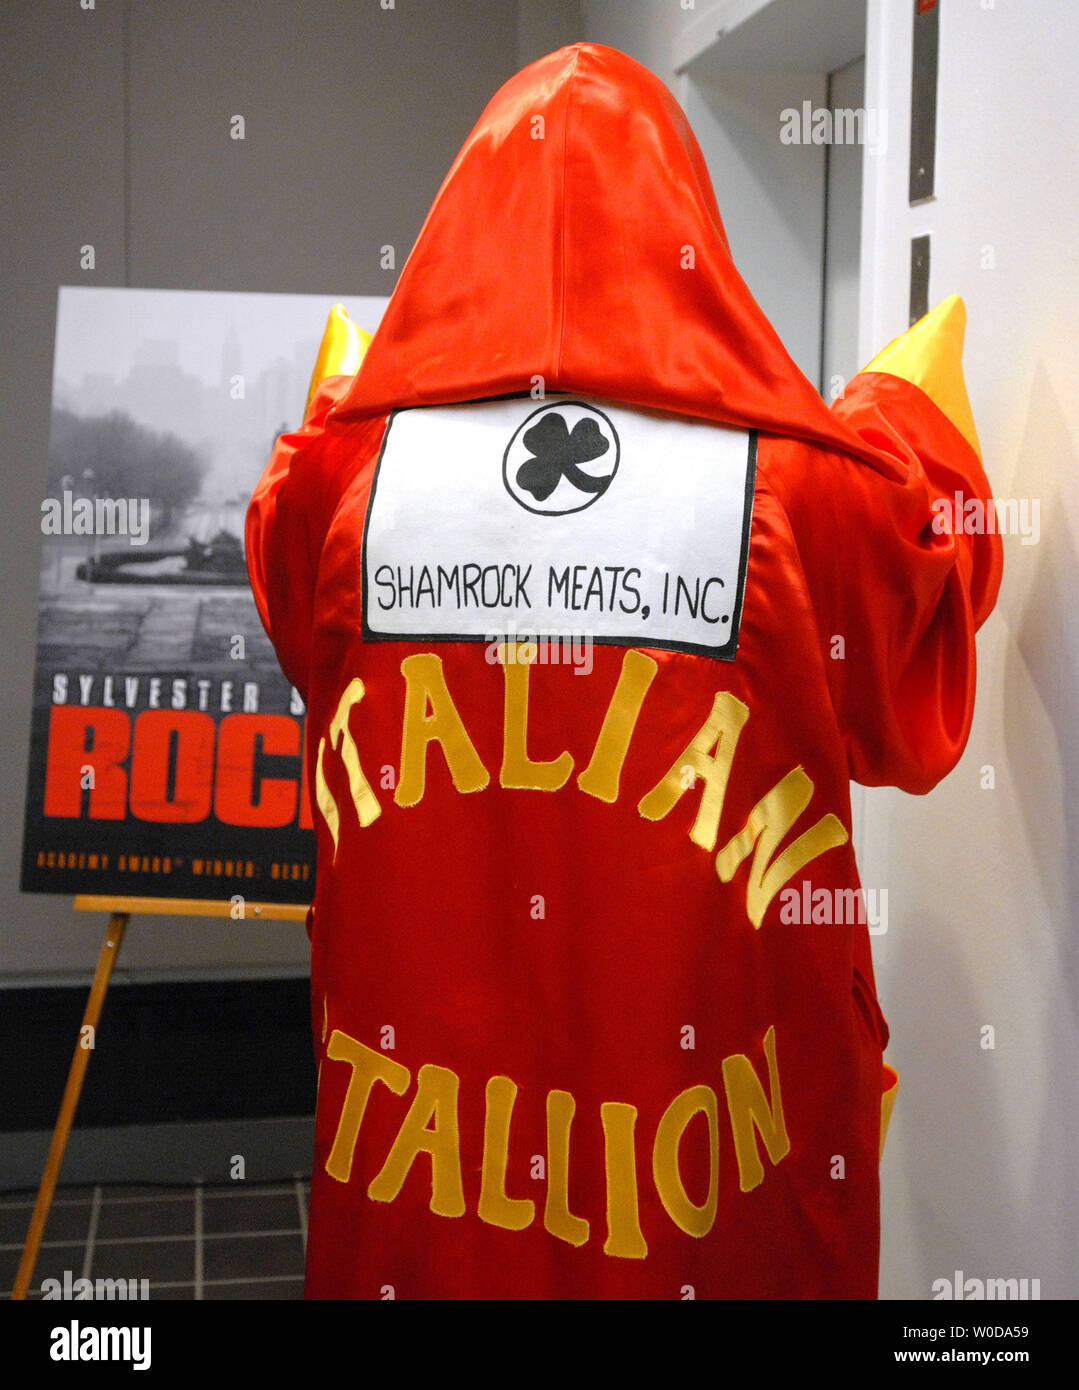 Actor and filmmaker Sylvester Stallone donated his boxing robe and other objects from the Academy Award-winning 'Rocky' films to The Smithsonian National Museum of American History in Washington on December 5, 2006.   (UPI Photo/Roger L. Wollenberg) Stock Photo